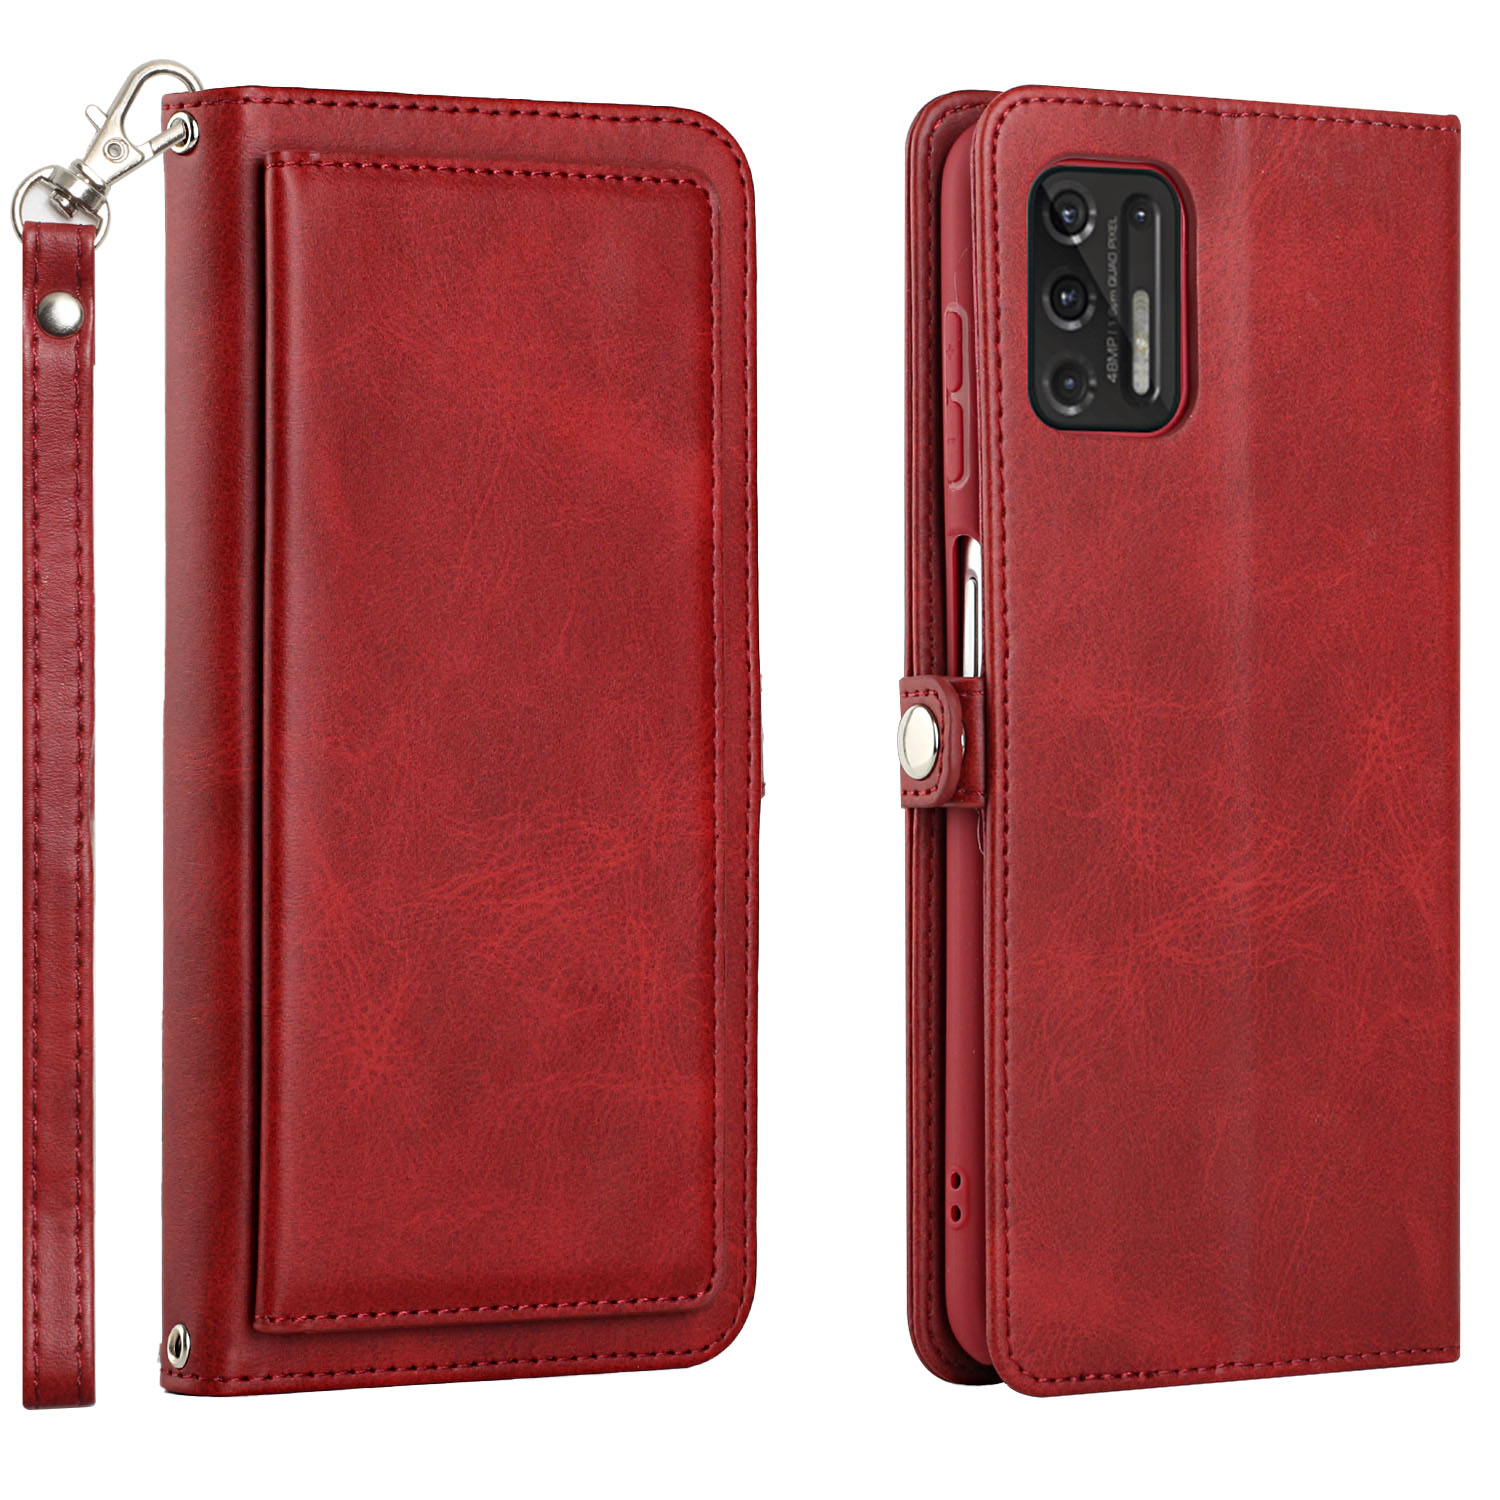 Premium PU Leather Folio WALLET Front Cover Case with Card Holder Slots and Wrist Strap for Motorola